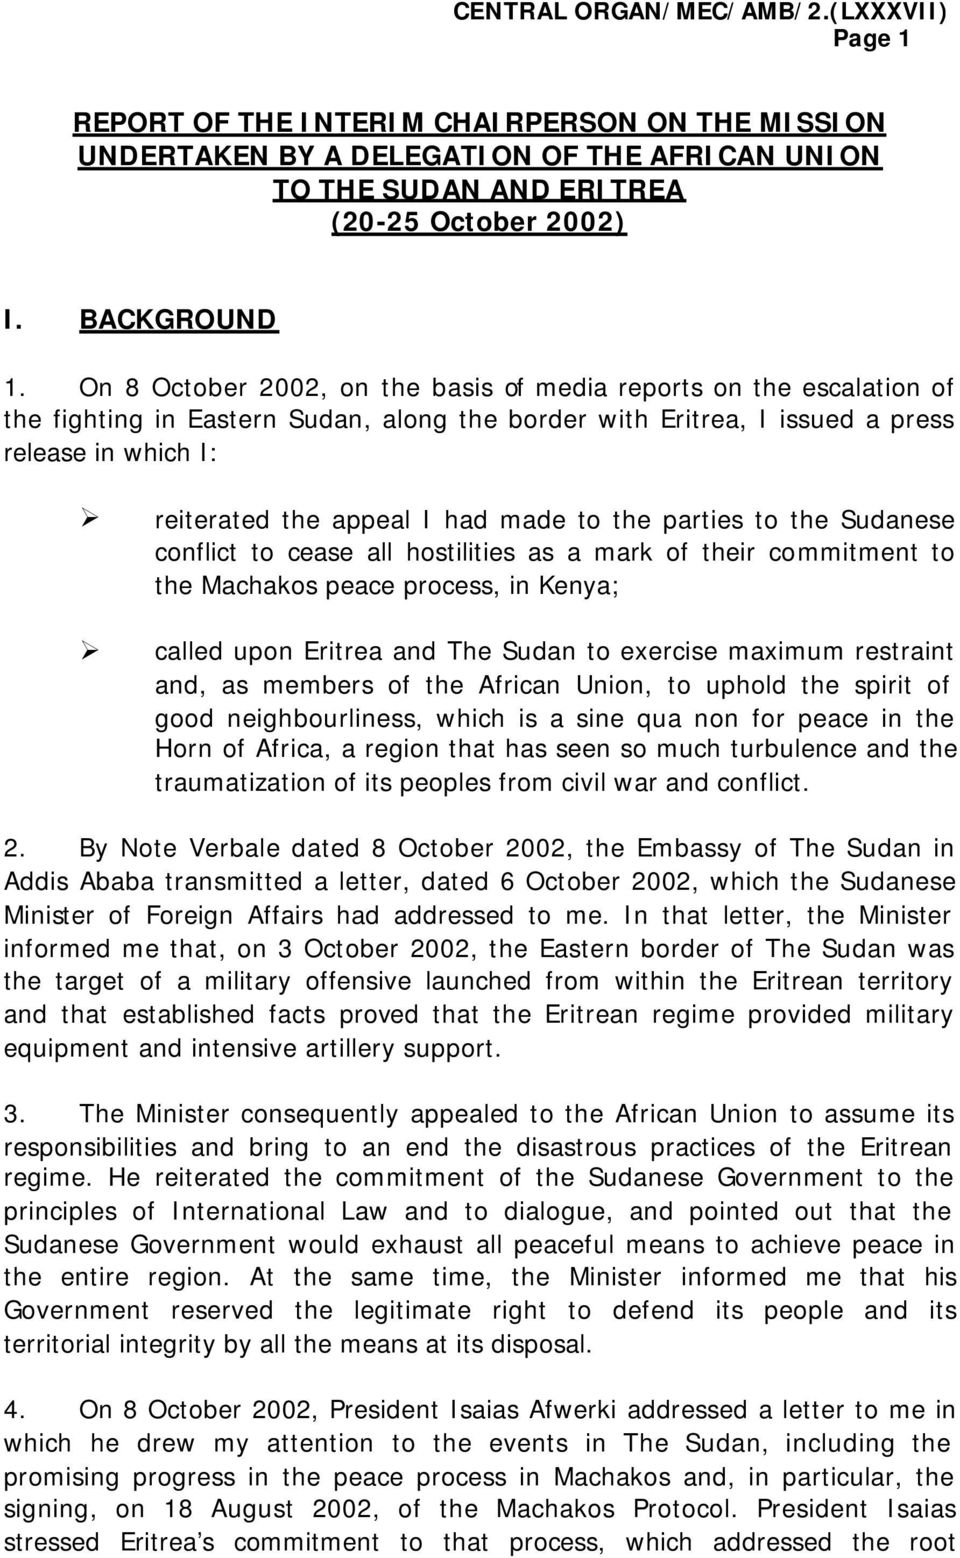 made to the parties to the Sudanese conflict to cease all hostilities as a mark of their commitment to the Machakos peace process, in Kenya; called upon Eritrea and The Sudan to exercise maximum